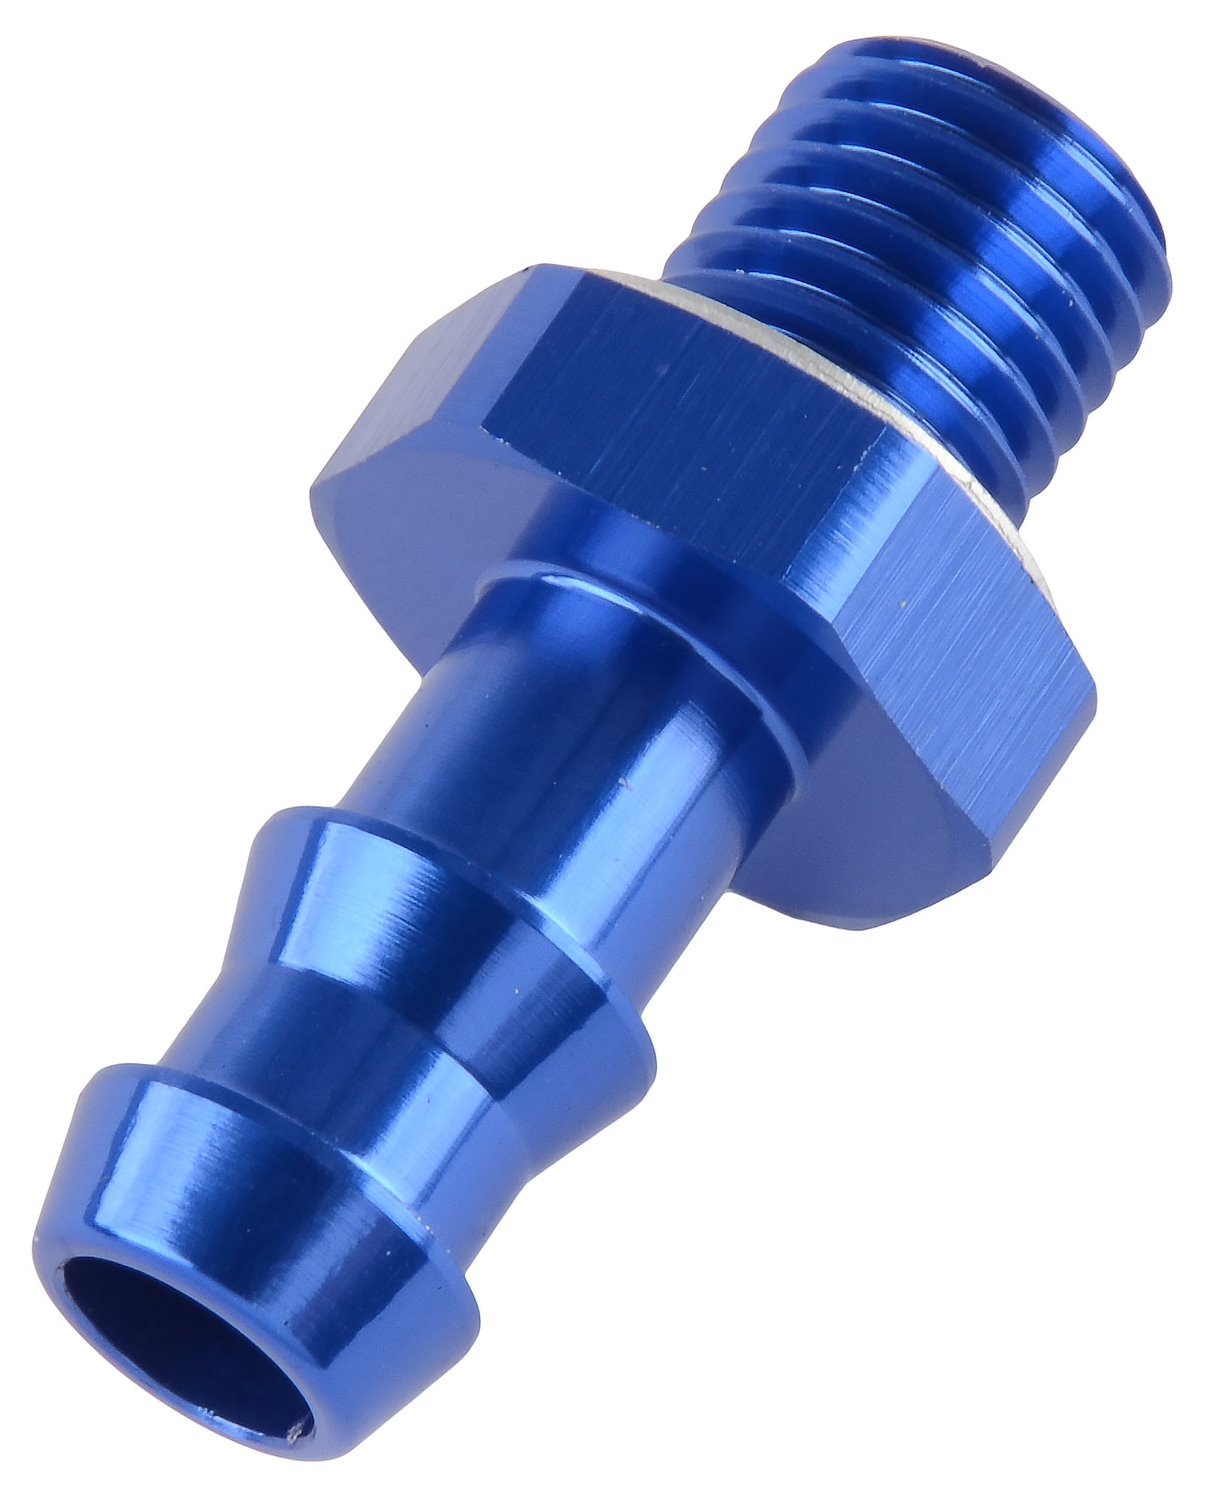 Hose Barb Adapter 12mm x 1.5 Male Straight